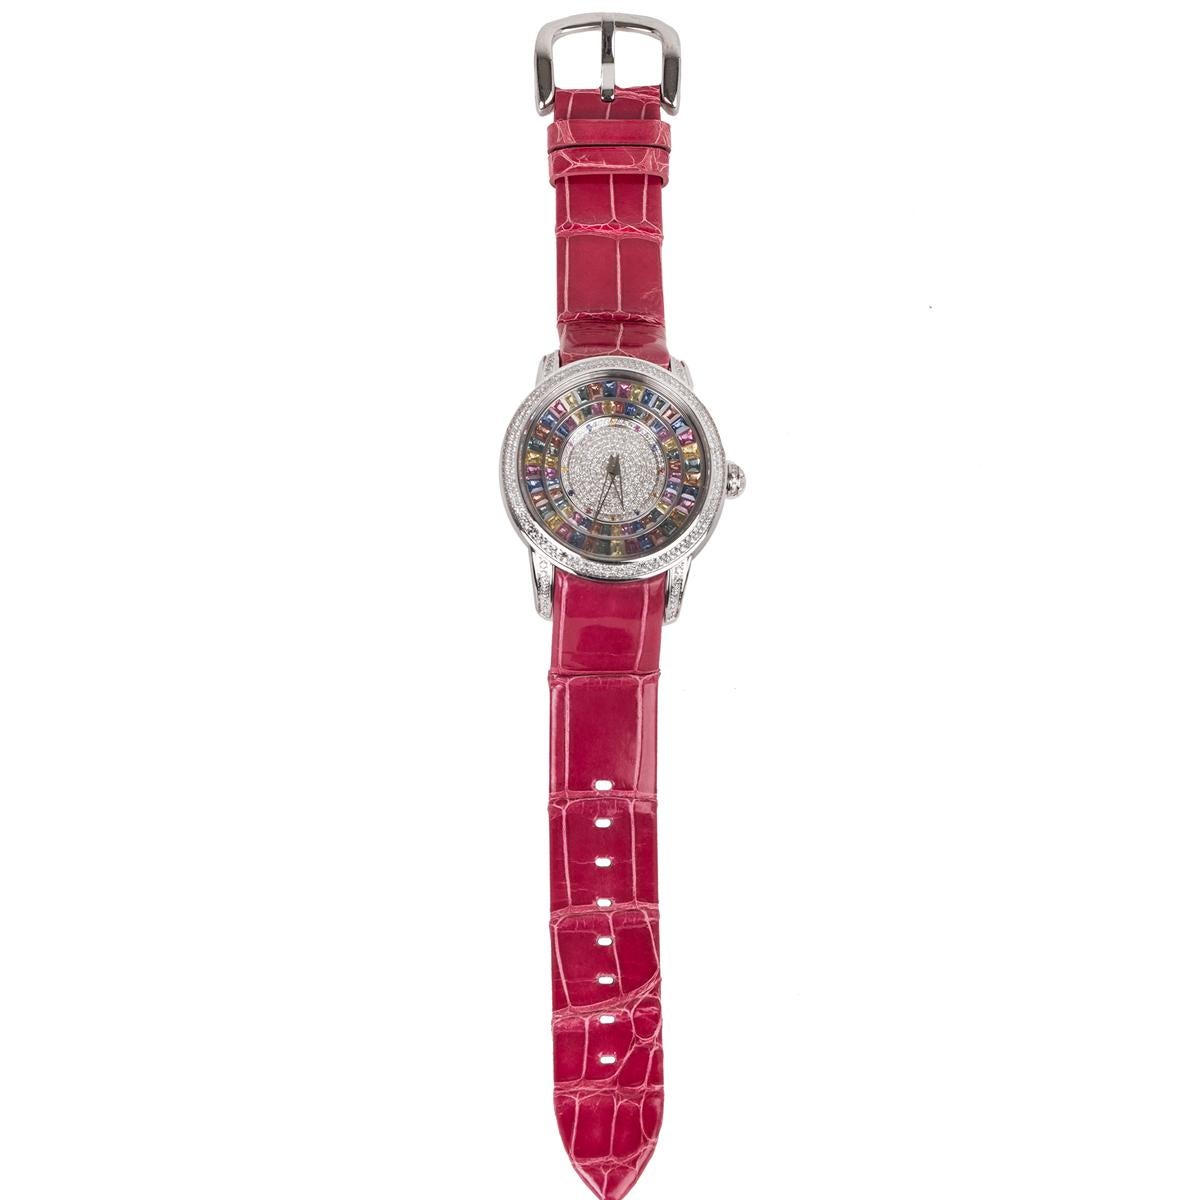 This watch features multi-color sapphire baguettes and round cut diamonds embedded on the face of the watch.  This watch features automatic movement and is made with stainless steel and fine leather.